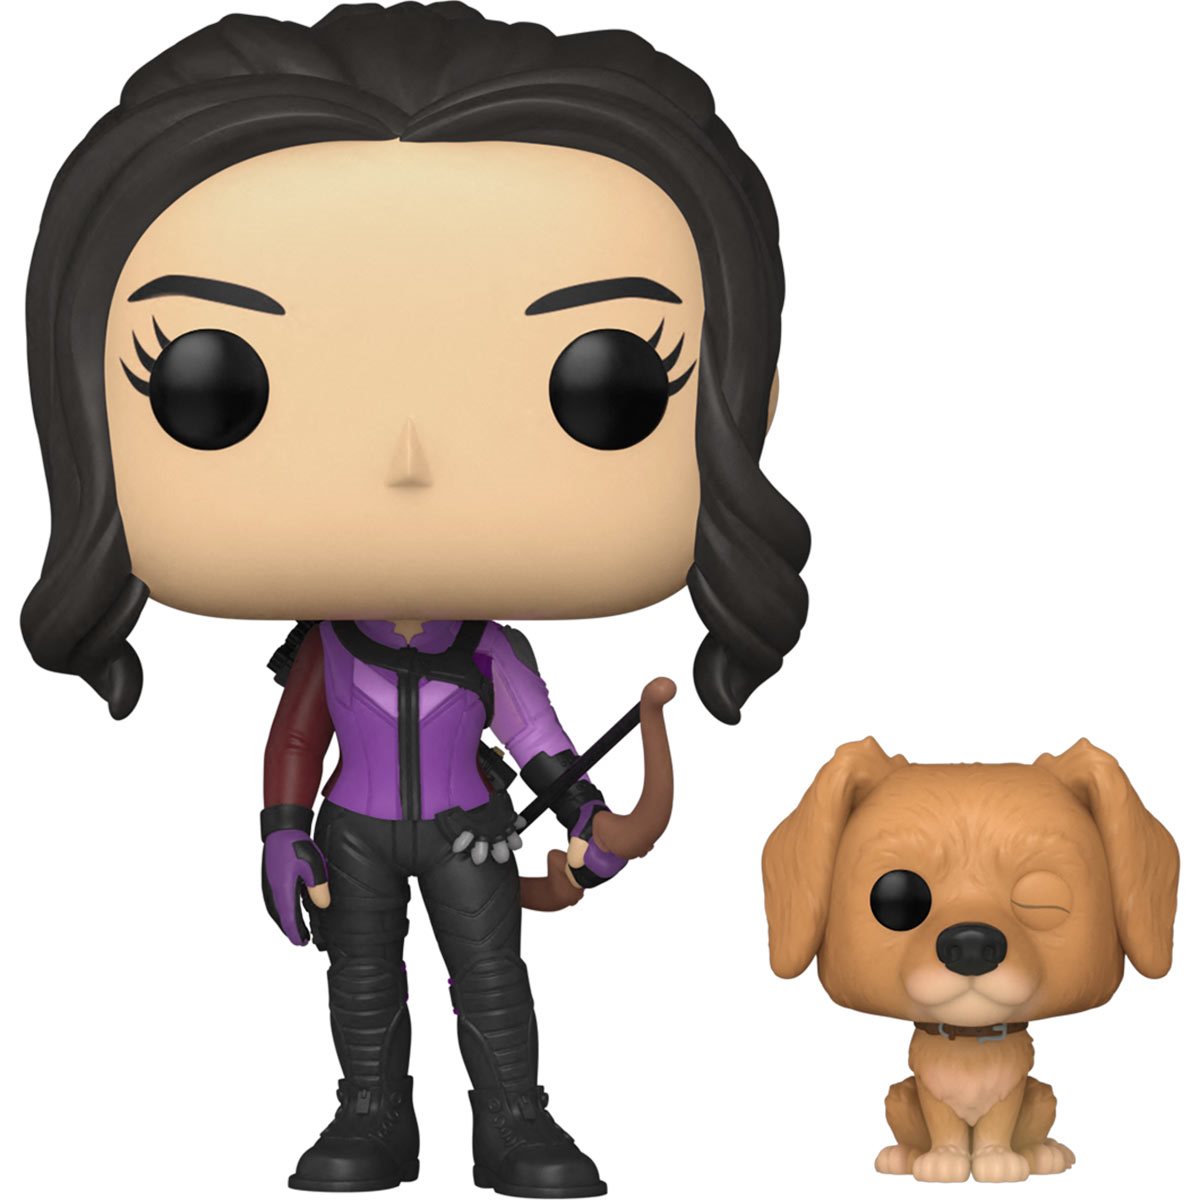 Kate Bishop with Lucky the Pizza Dog Funko Pop! Vinyl Figure #1212